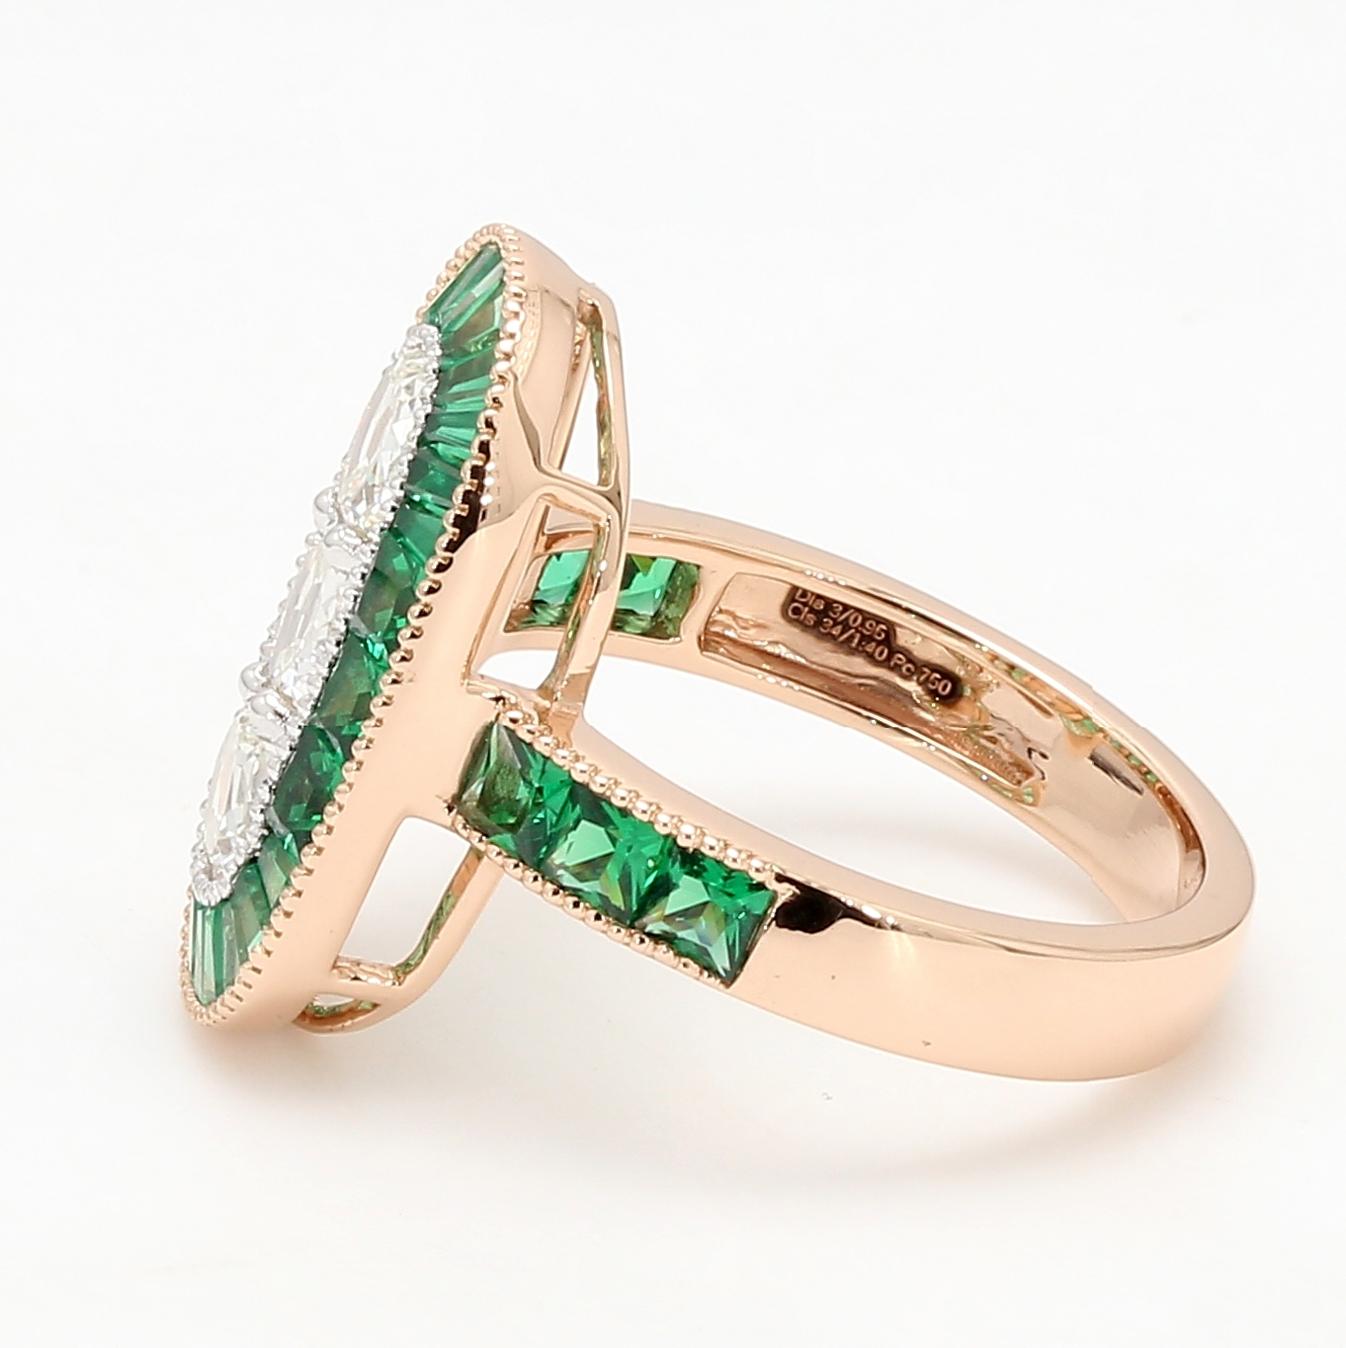 PANIM 18K Rose Gold Old Mine Cut Diamond & Emerald Ring In New Condition For Sale In Tsim Sha Tsui, Hong Kong